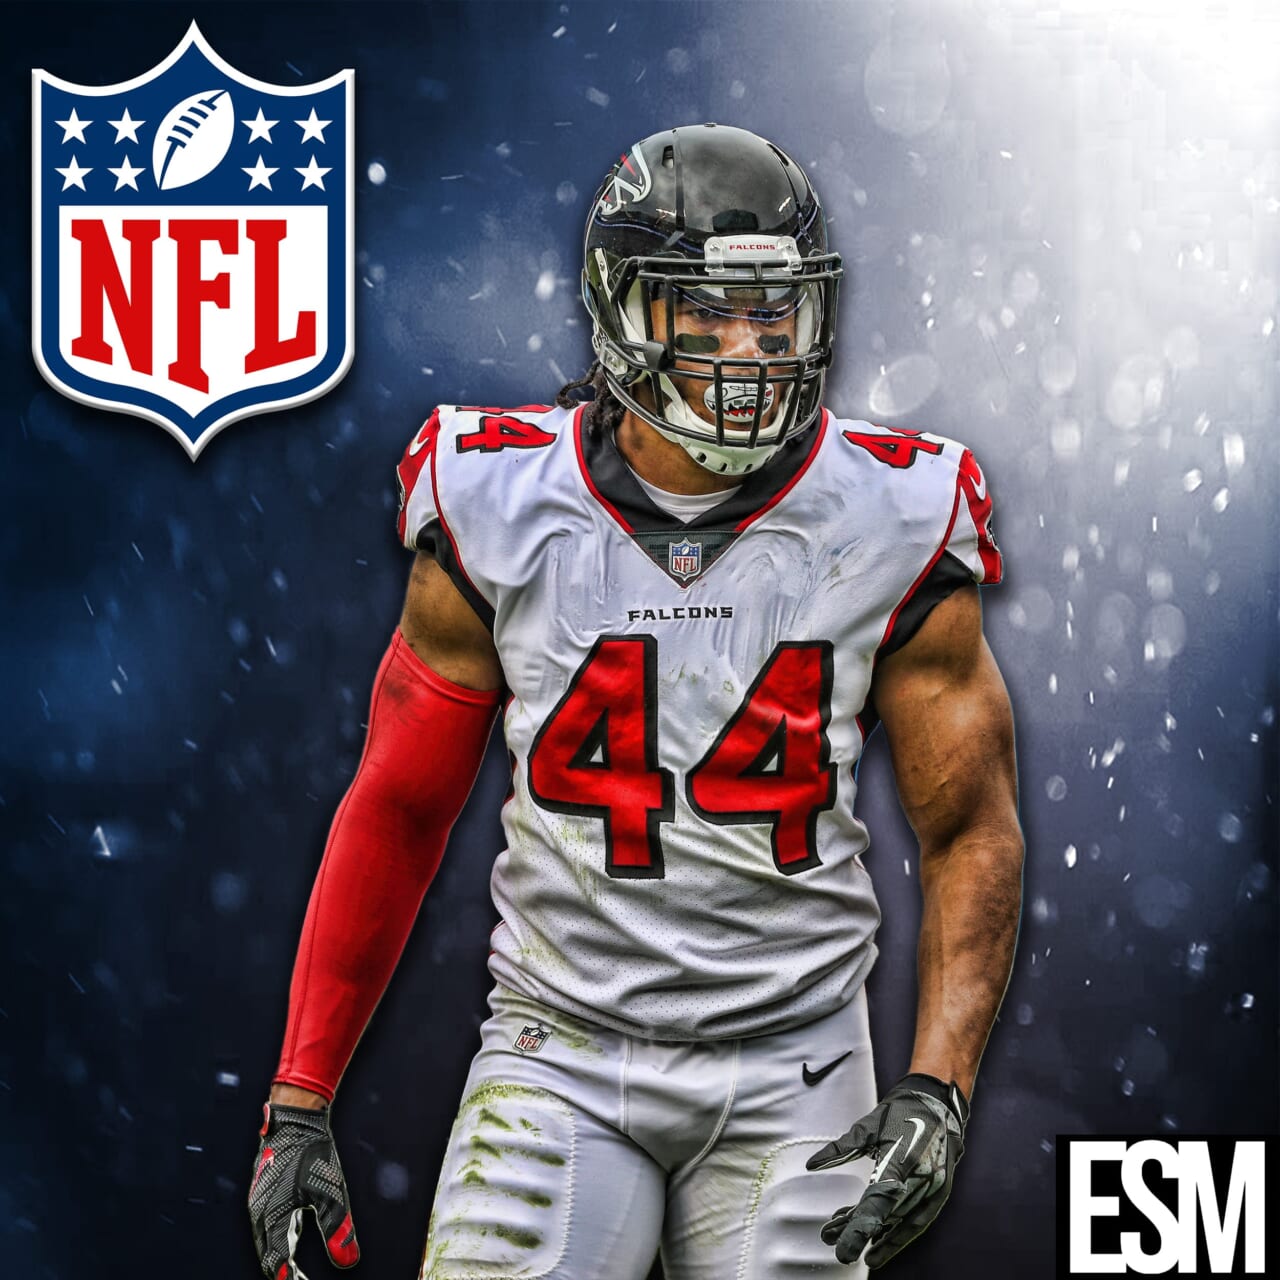 Should The New York Giants Pursue Vic Beasley?